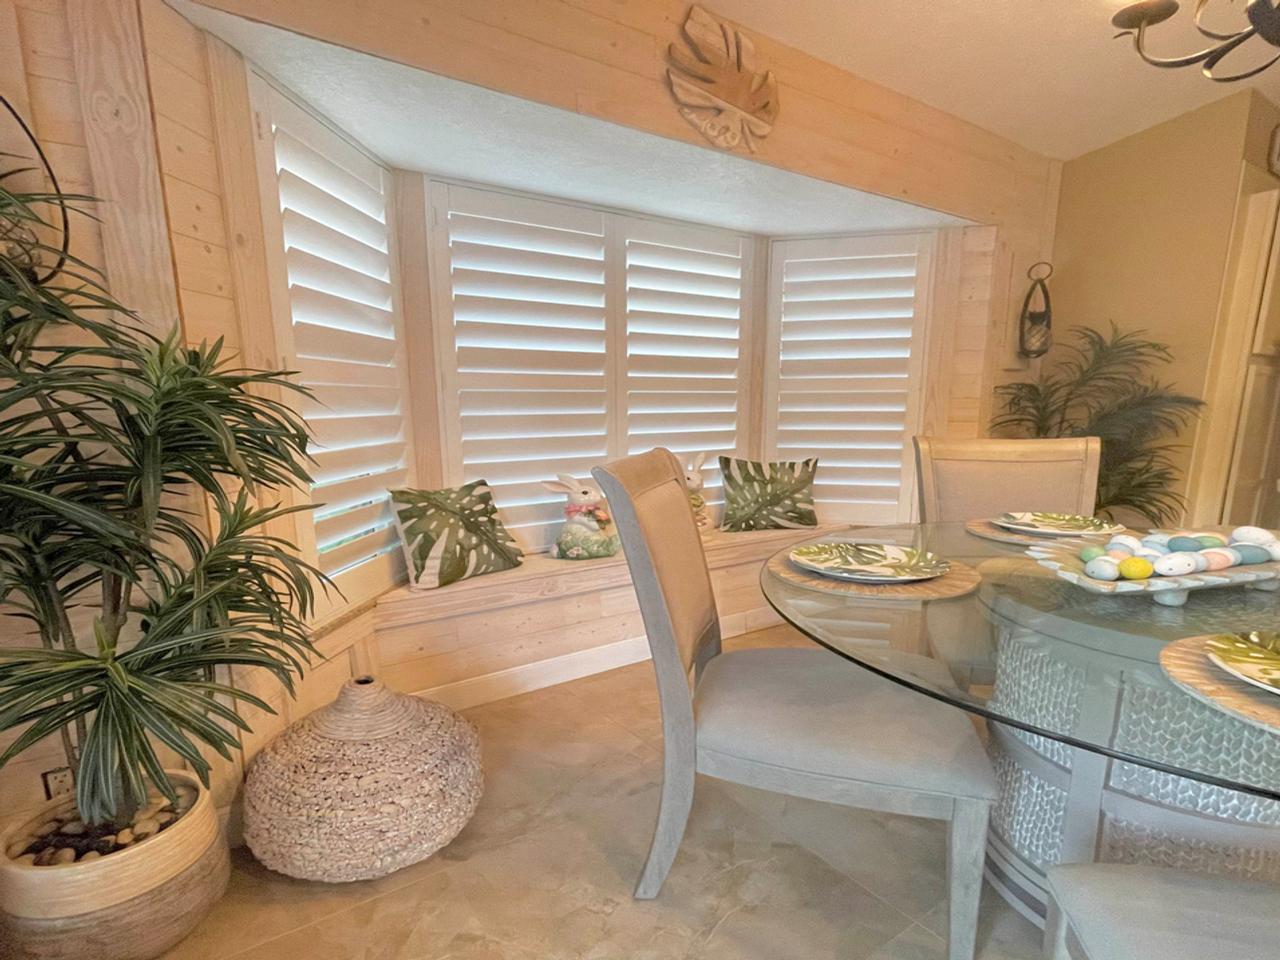 Bay window and seat with plantation shutters